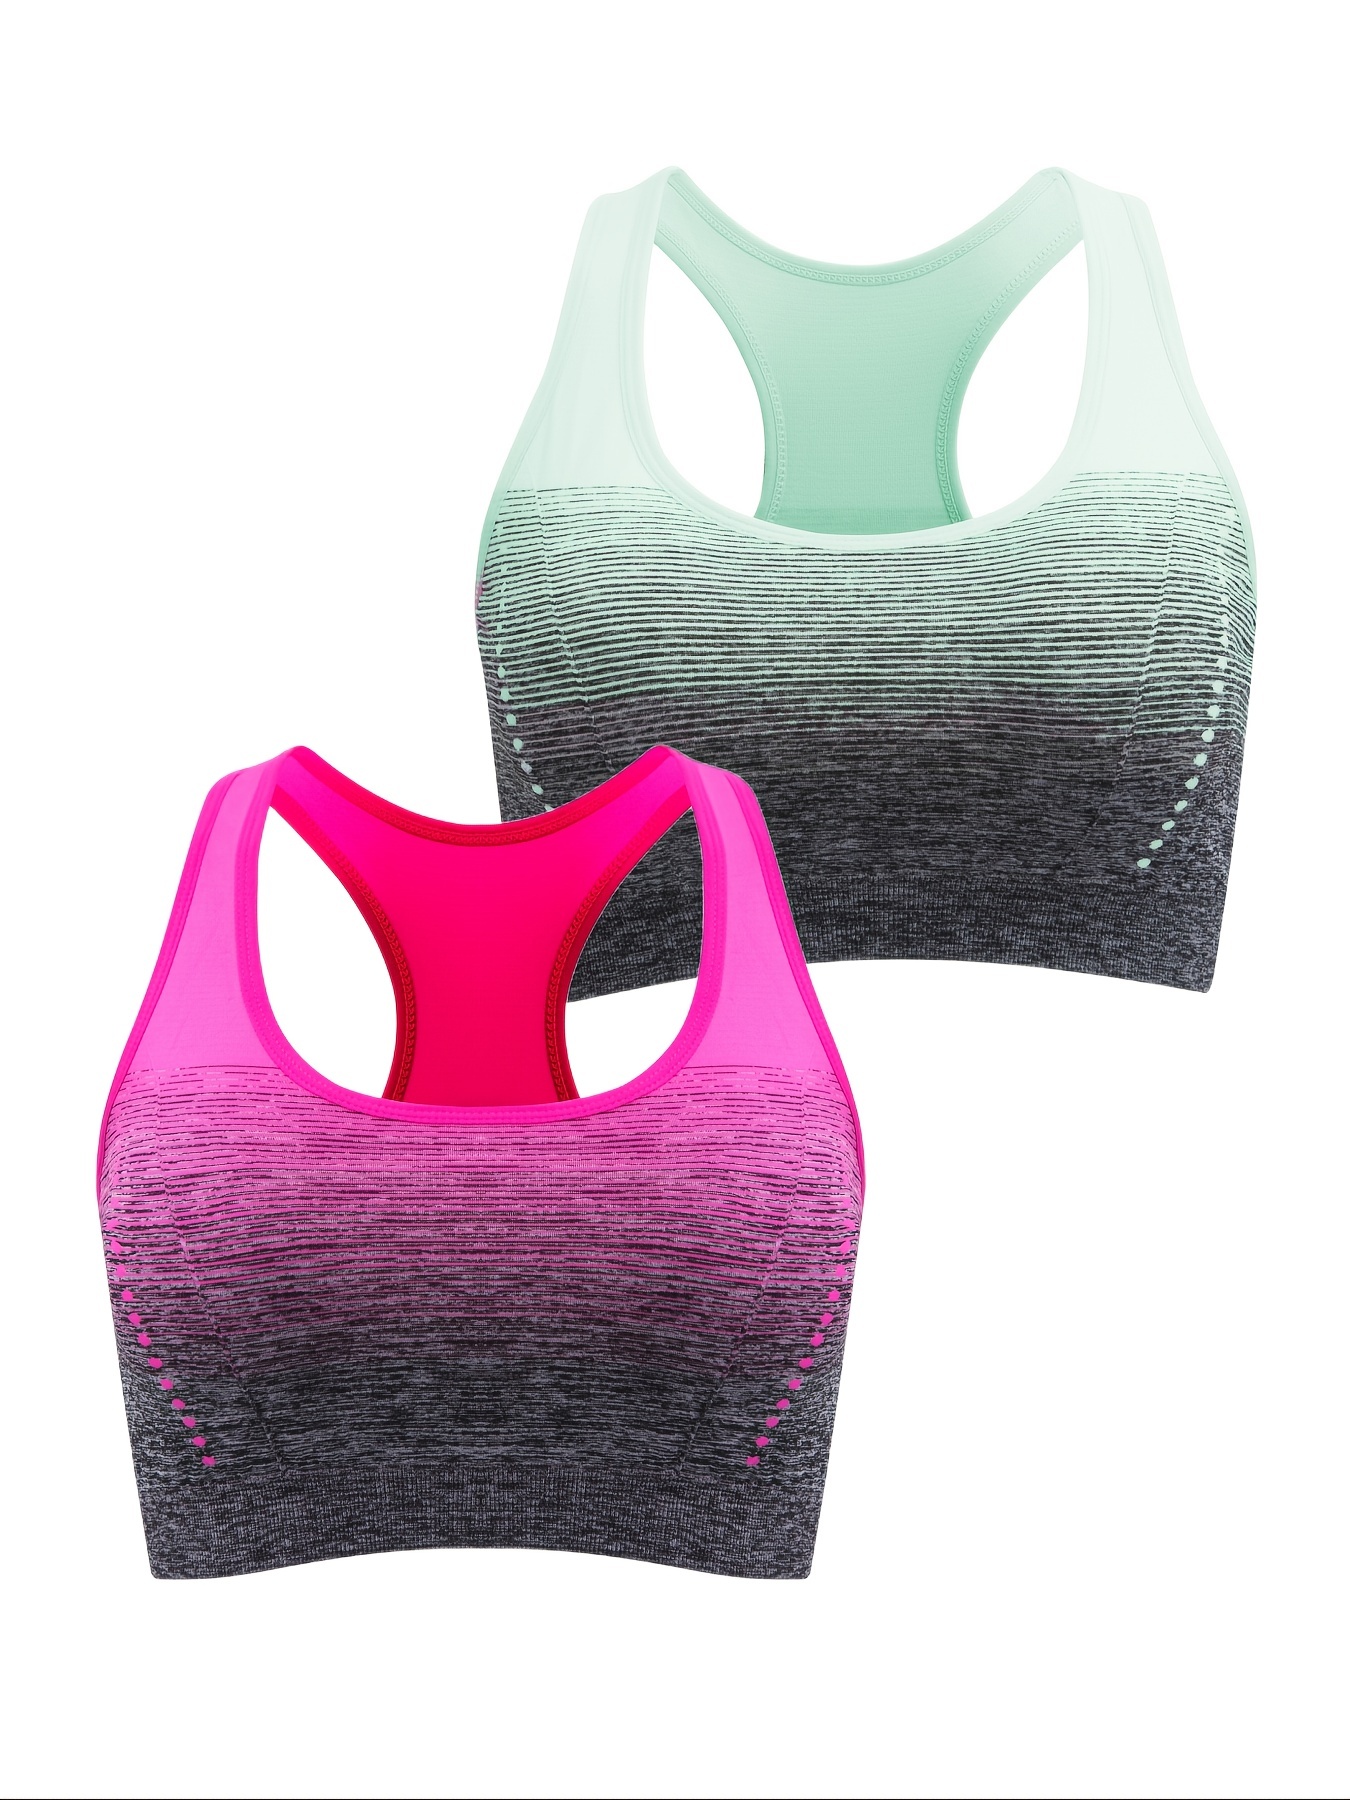 1pc Fashionable Sports Bra For Women, Breathable Moisture Wicking